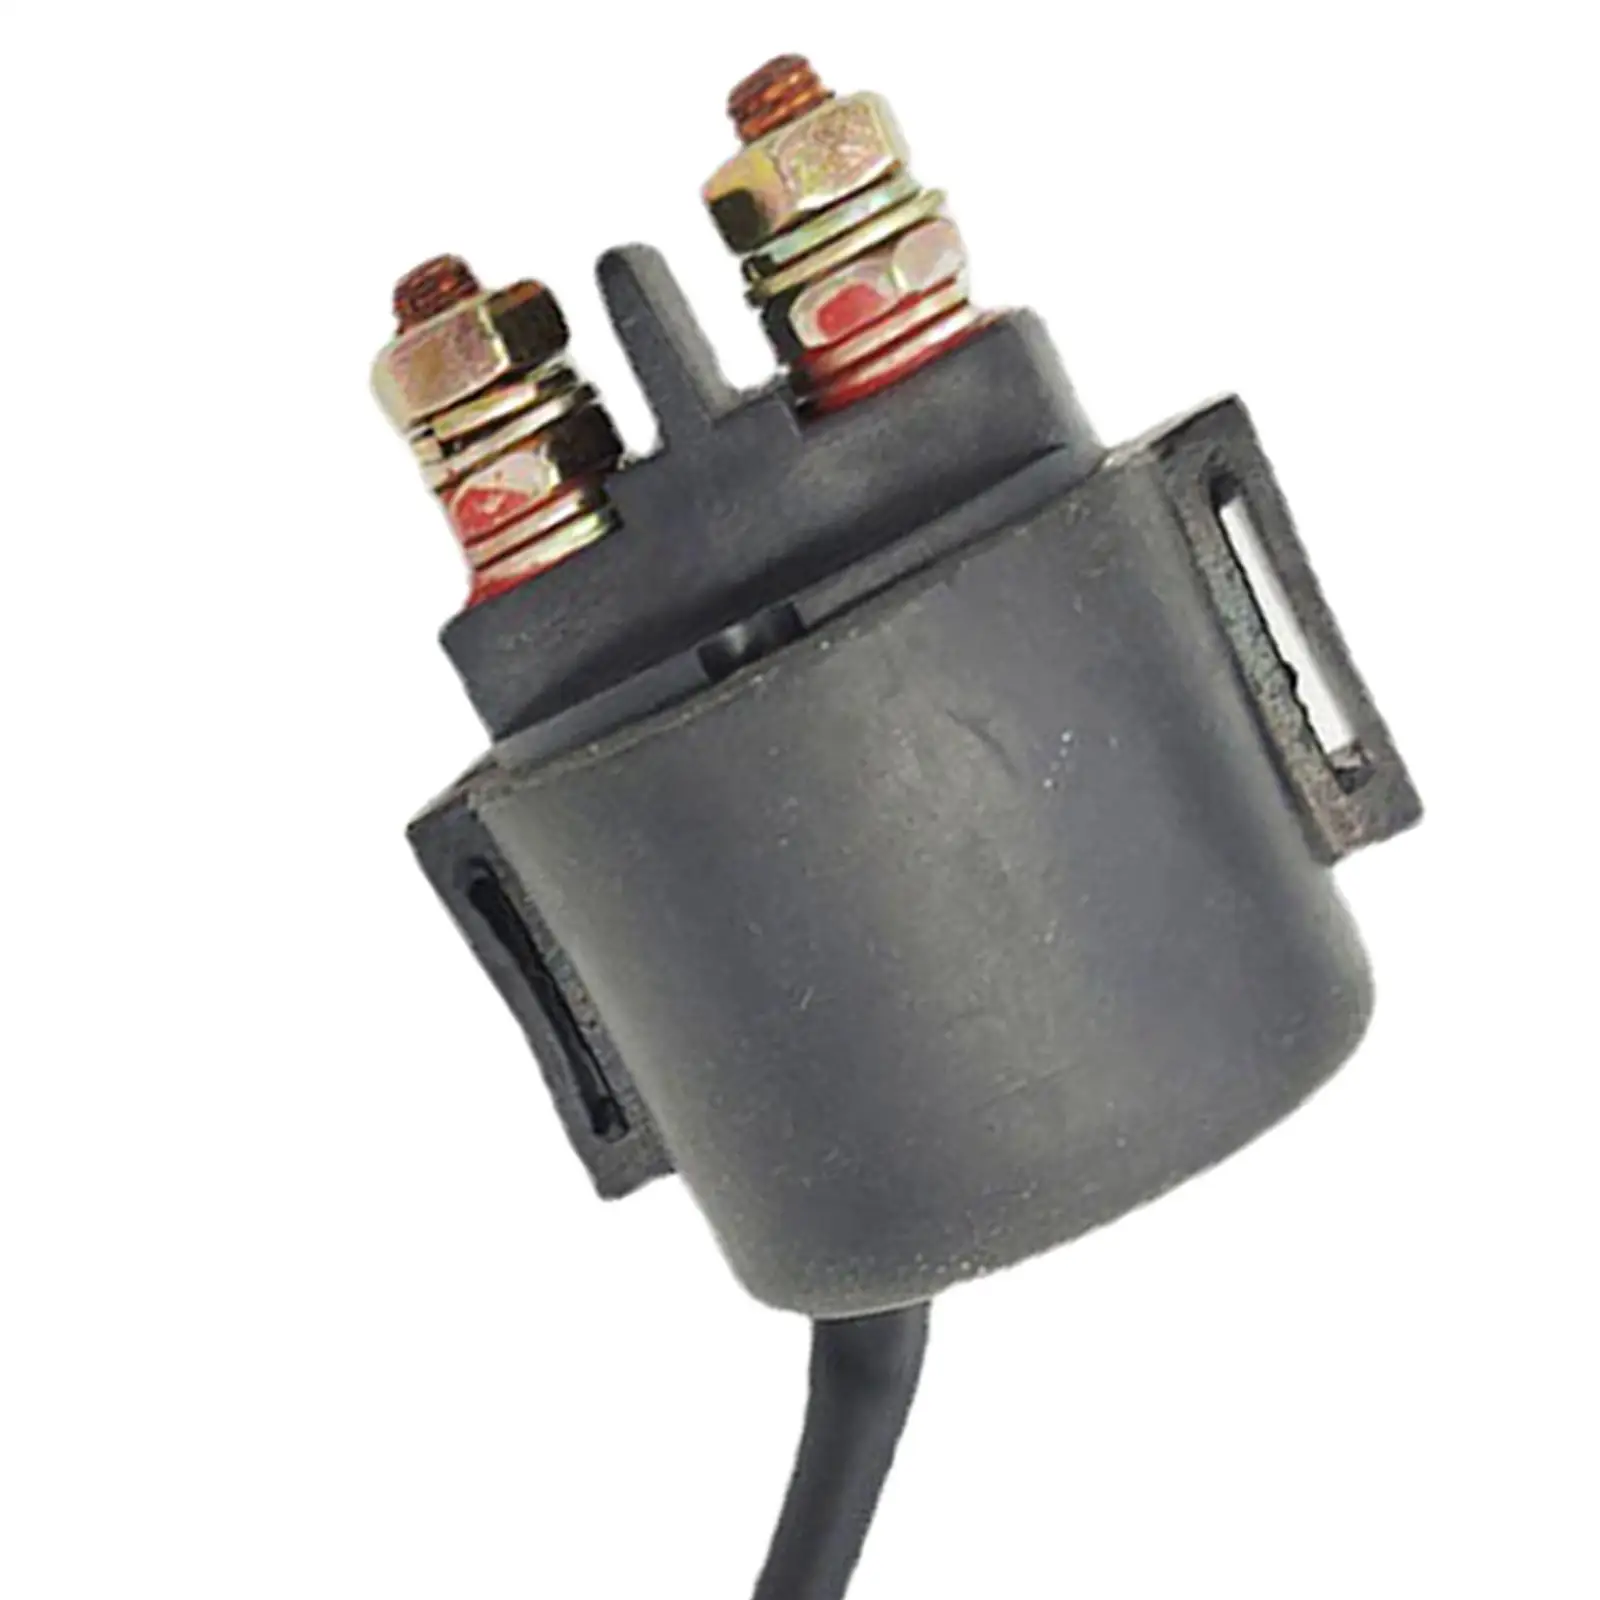 Motor Starter Relay 6G1-81941 Parts Durable Premium Supplies Professional Strong for  15HP 30HP 50HP 60HP